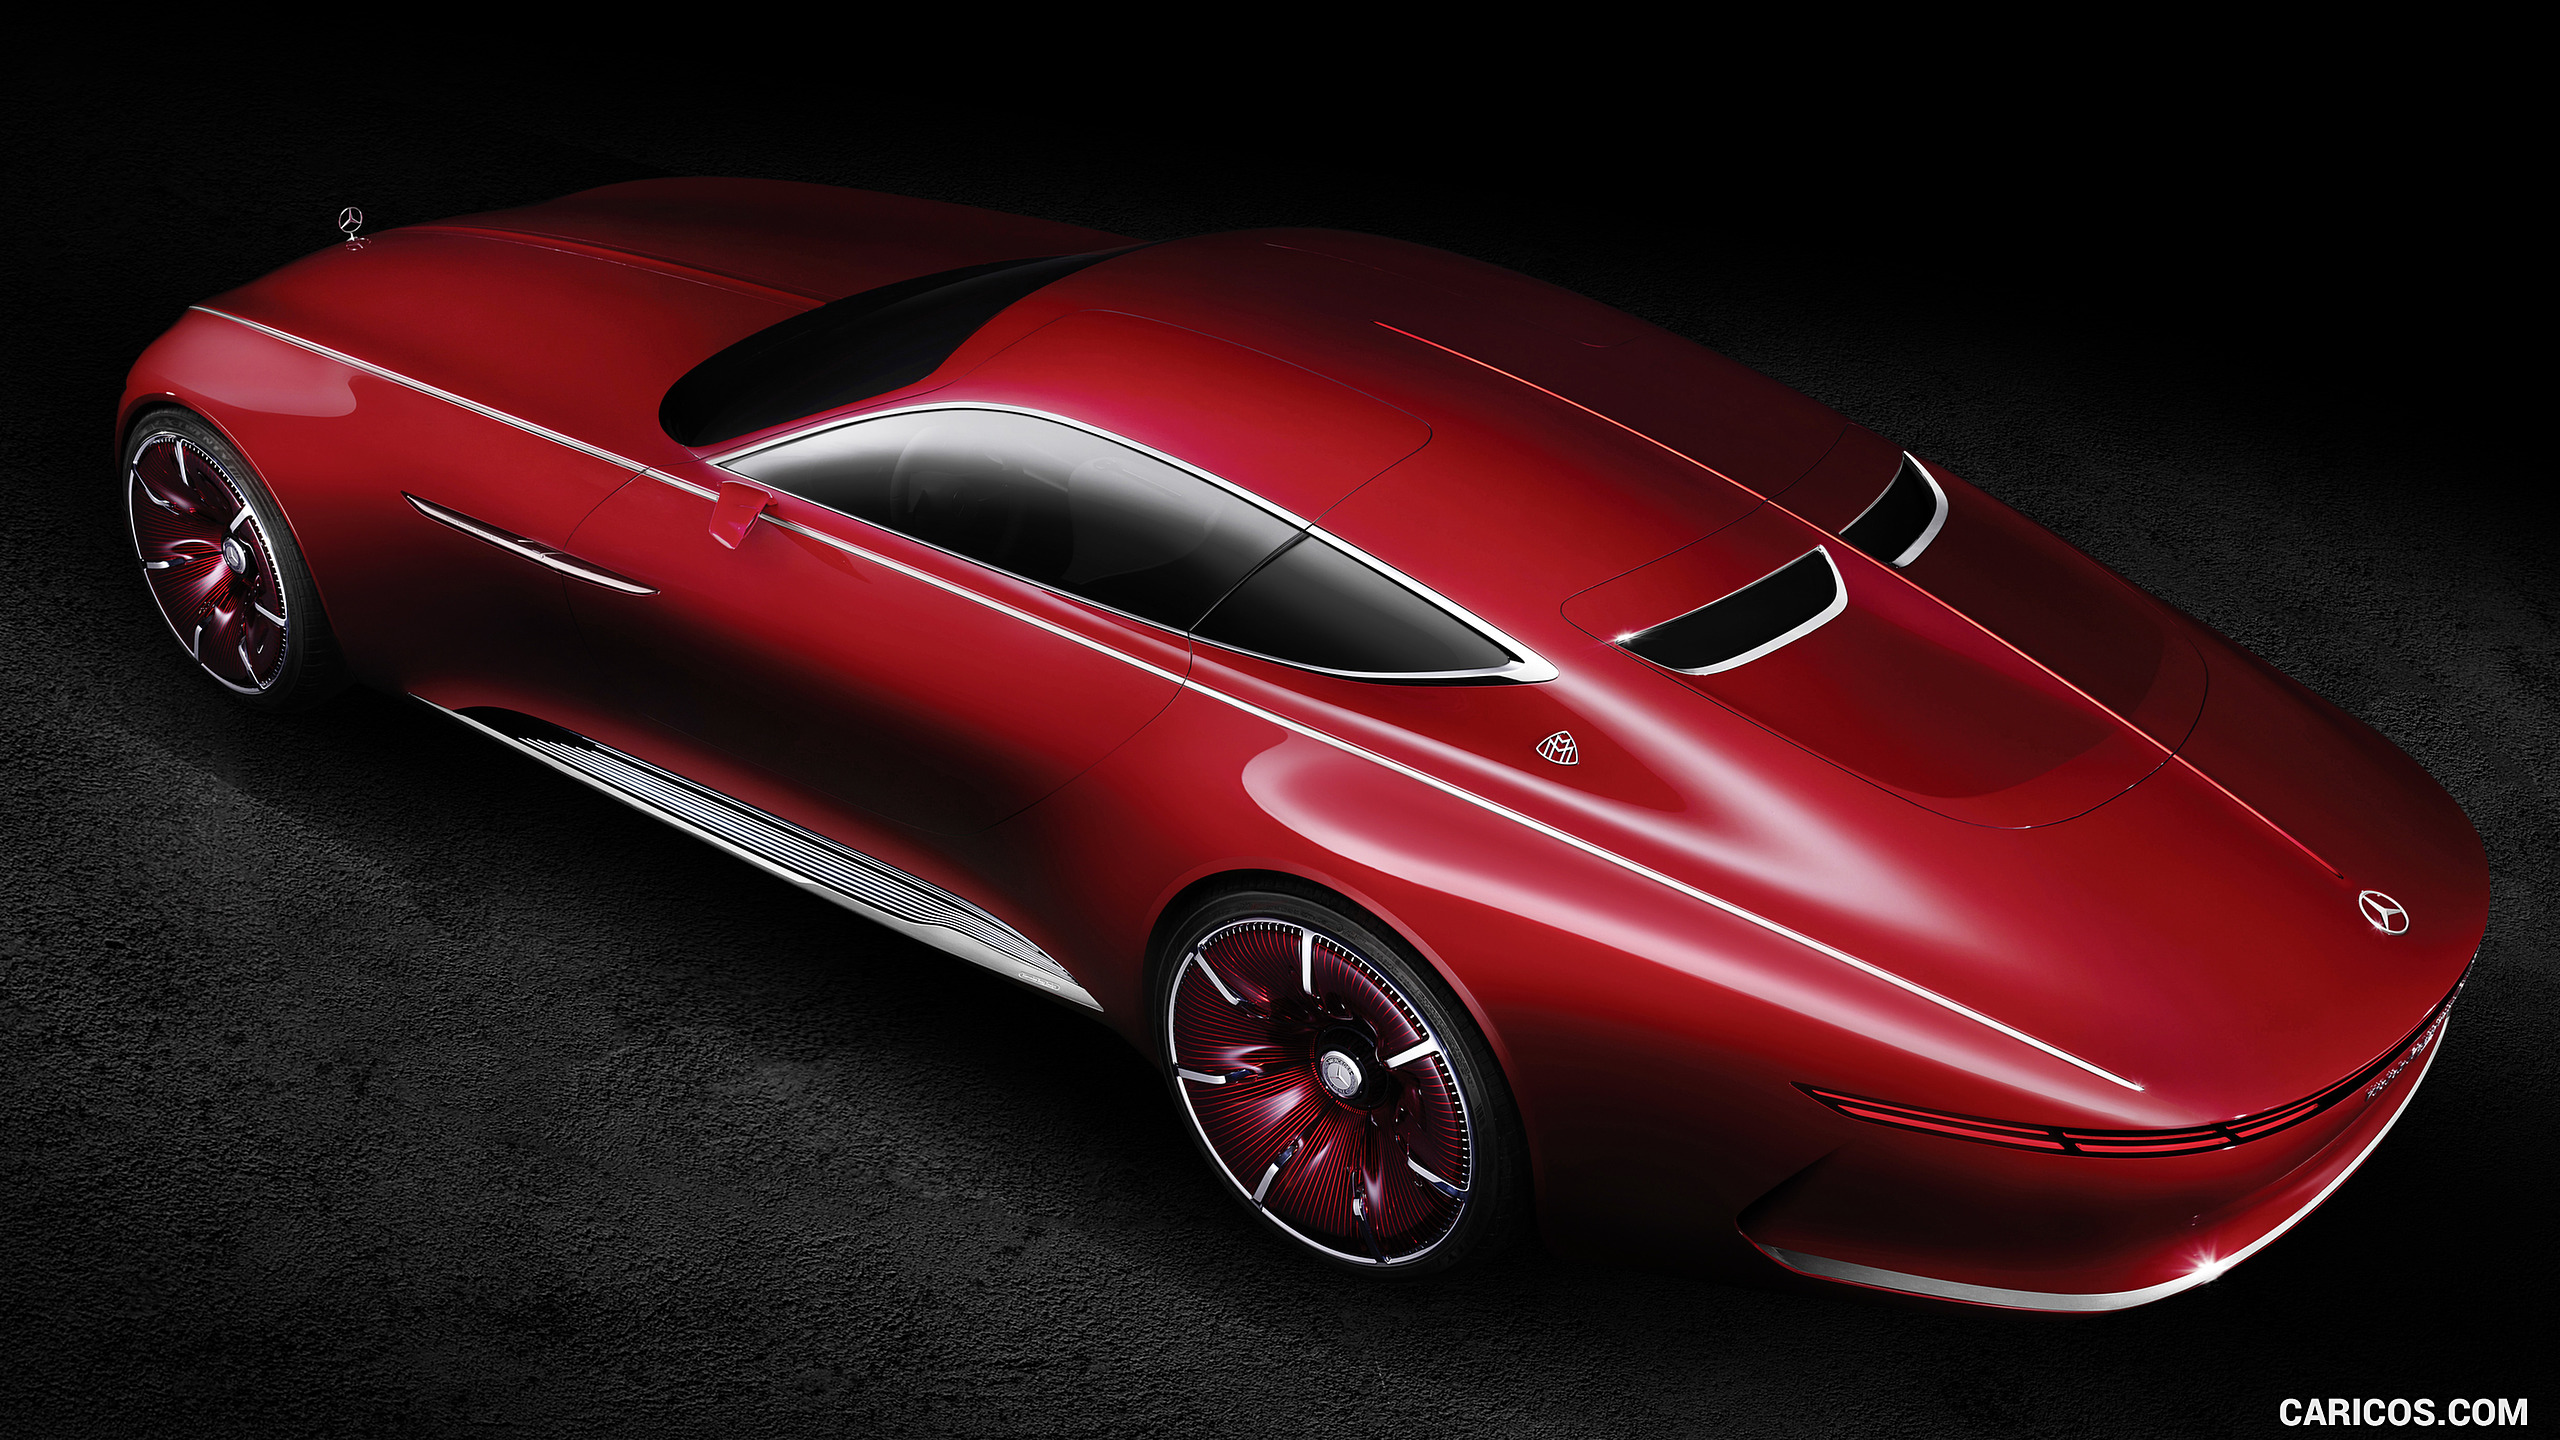 2016 Mercedes-Maybach 6 Concept - Top, #7 of 31